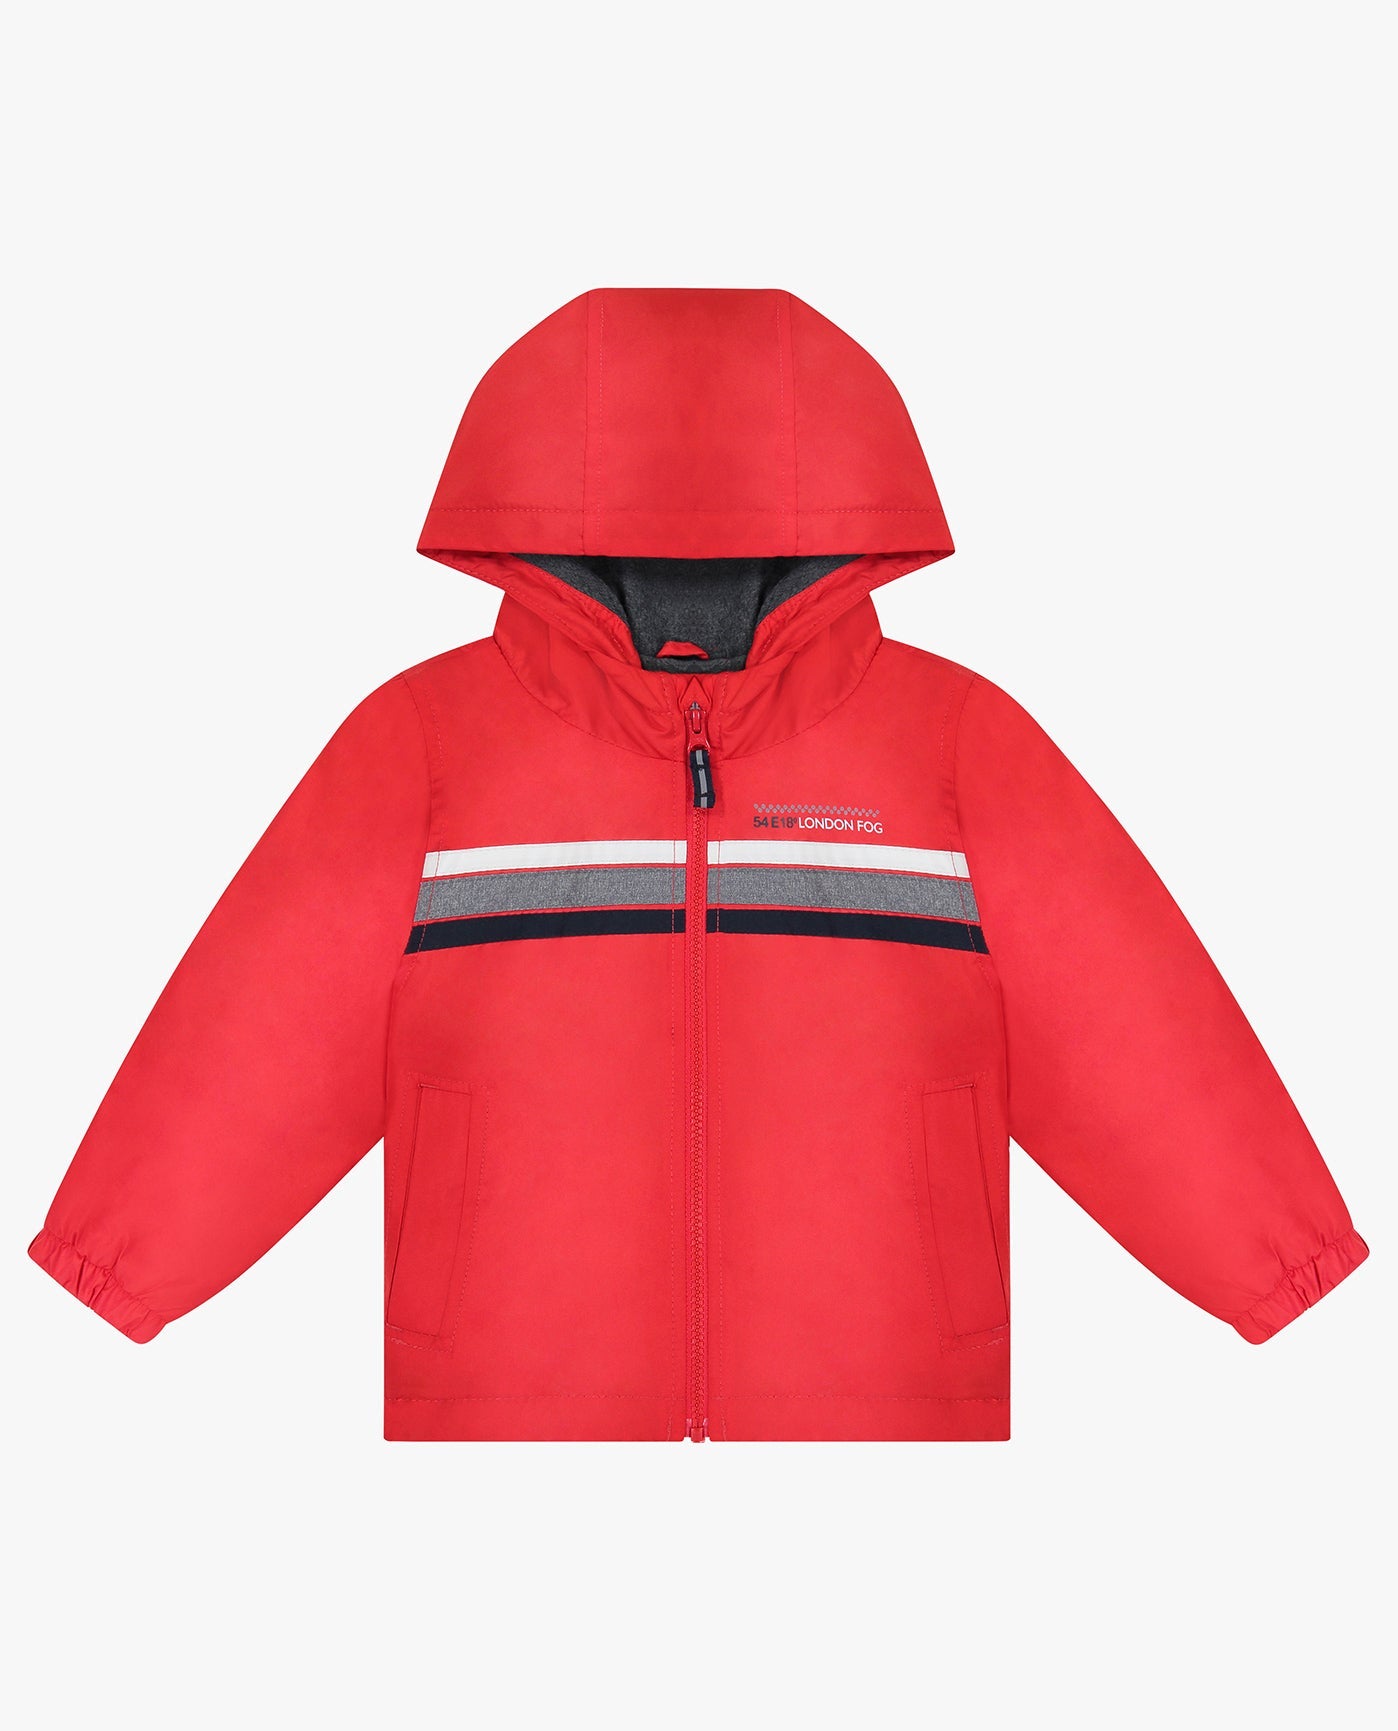 ALT VIEW OF BOYS ZIP FRONT HOODED SPORTY STRIPE RAINCOAT | RED